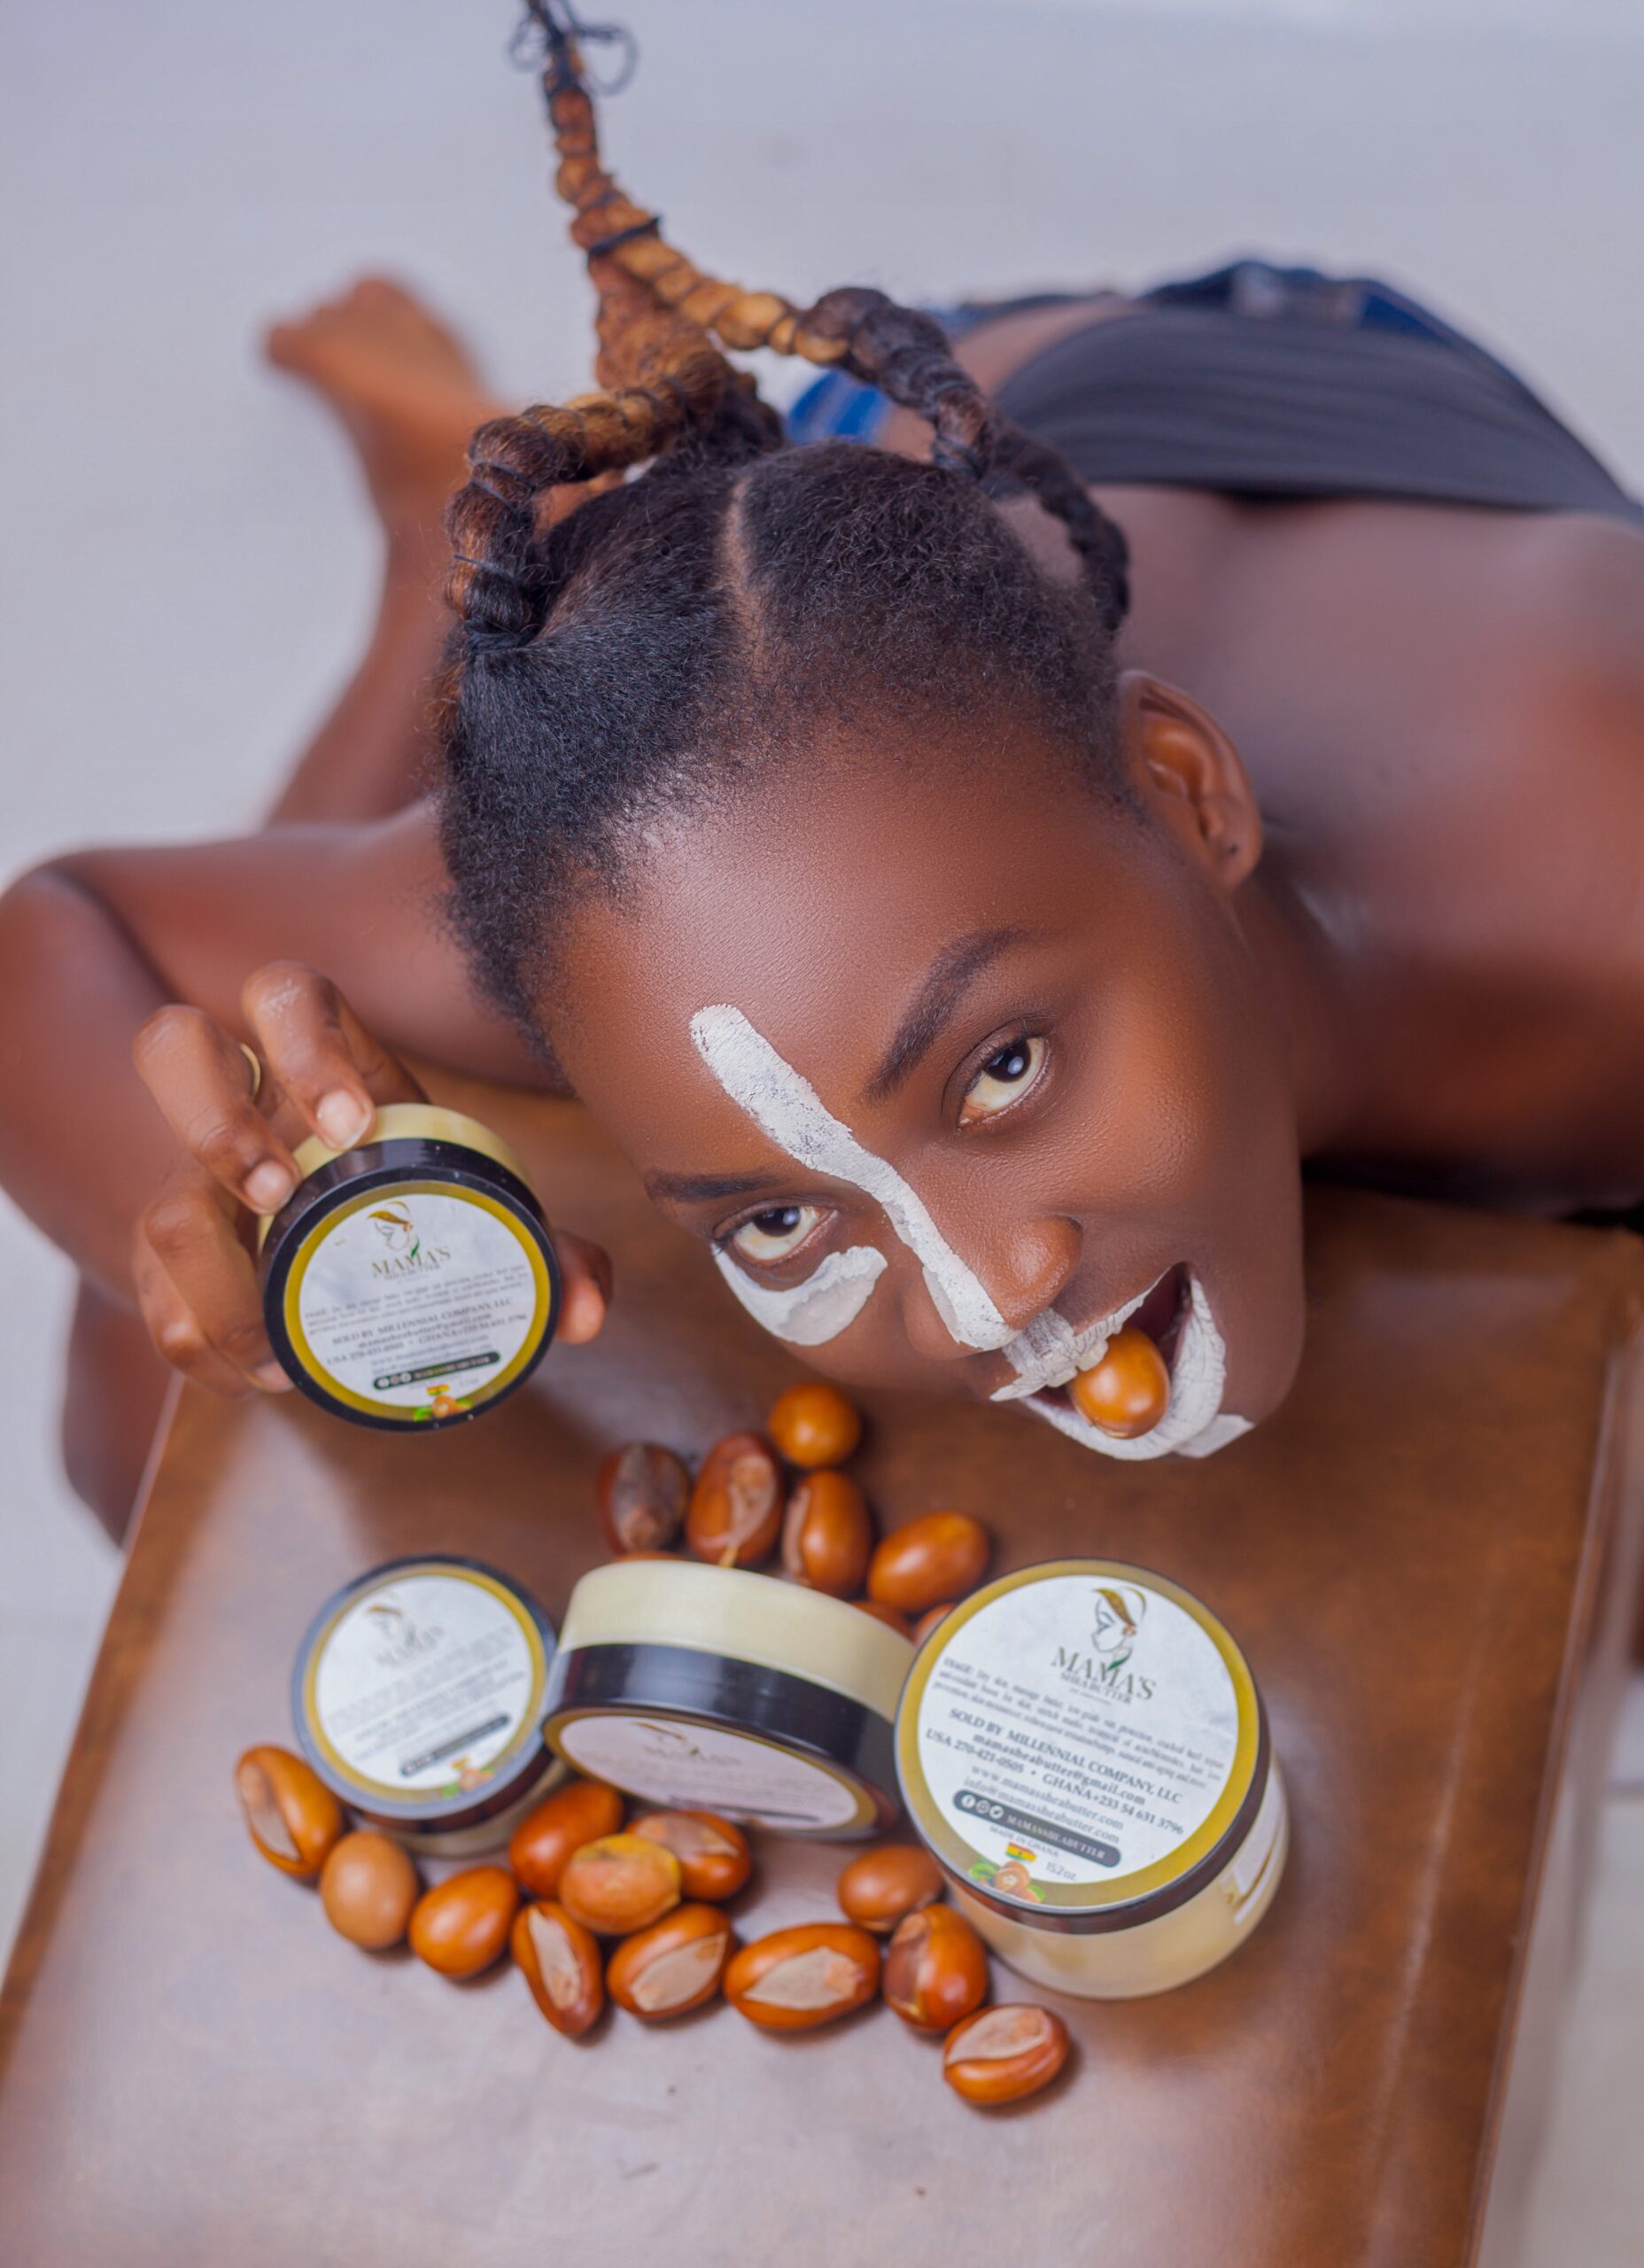 SHEA BUTTER: 10 TRUTHS YOU WILL LOVE ABOUT IT